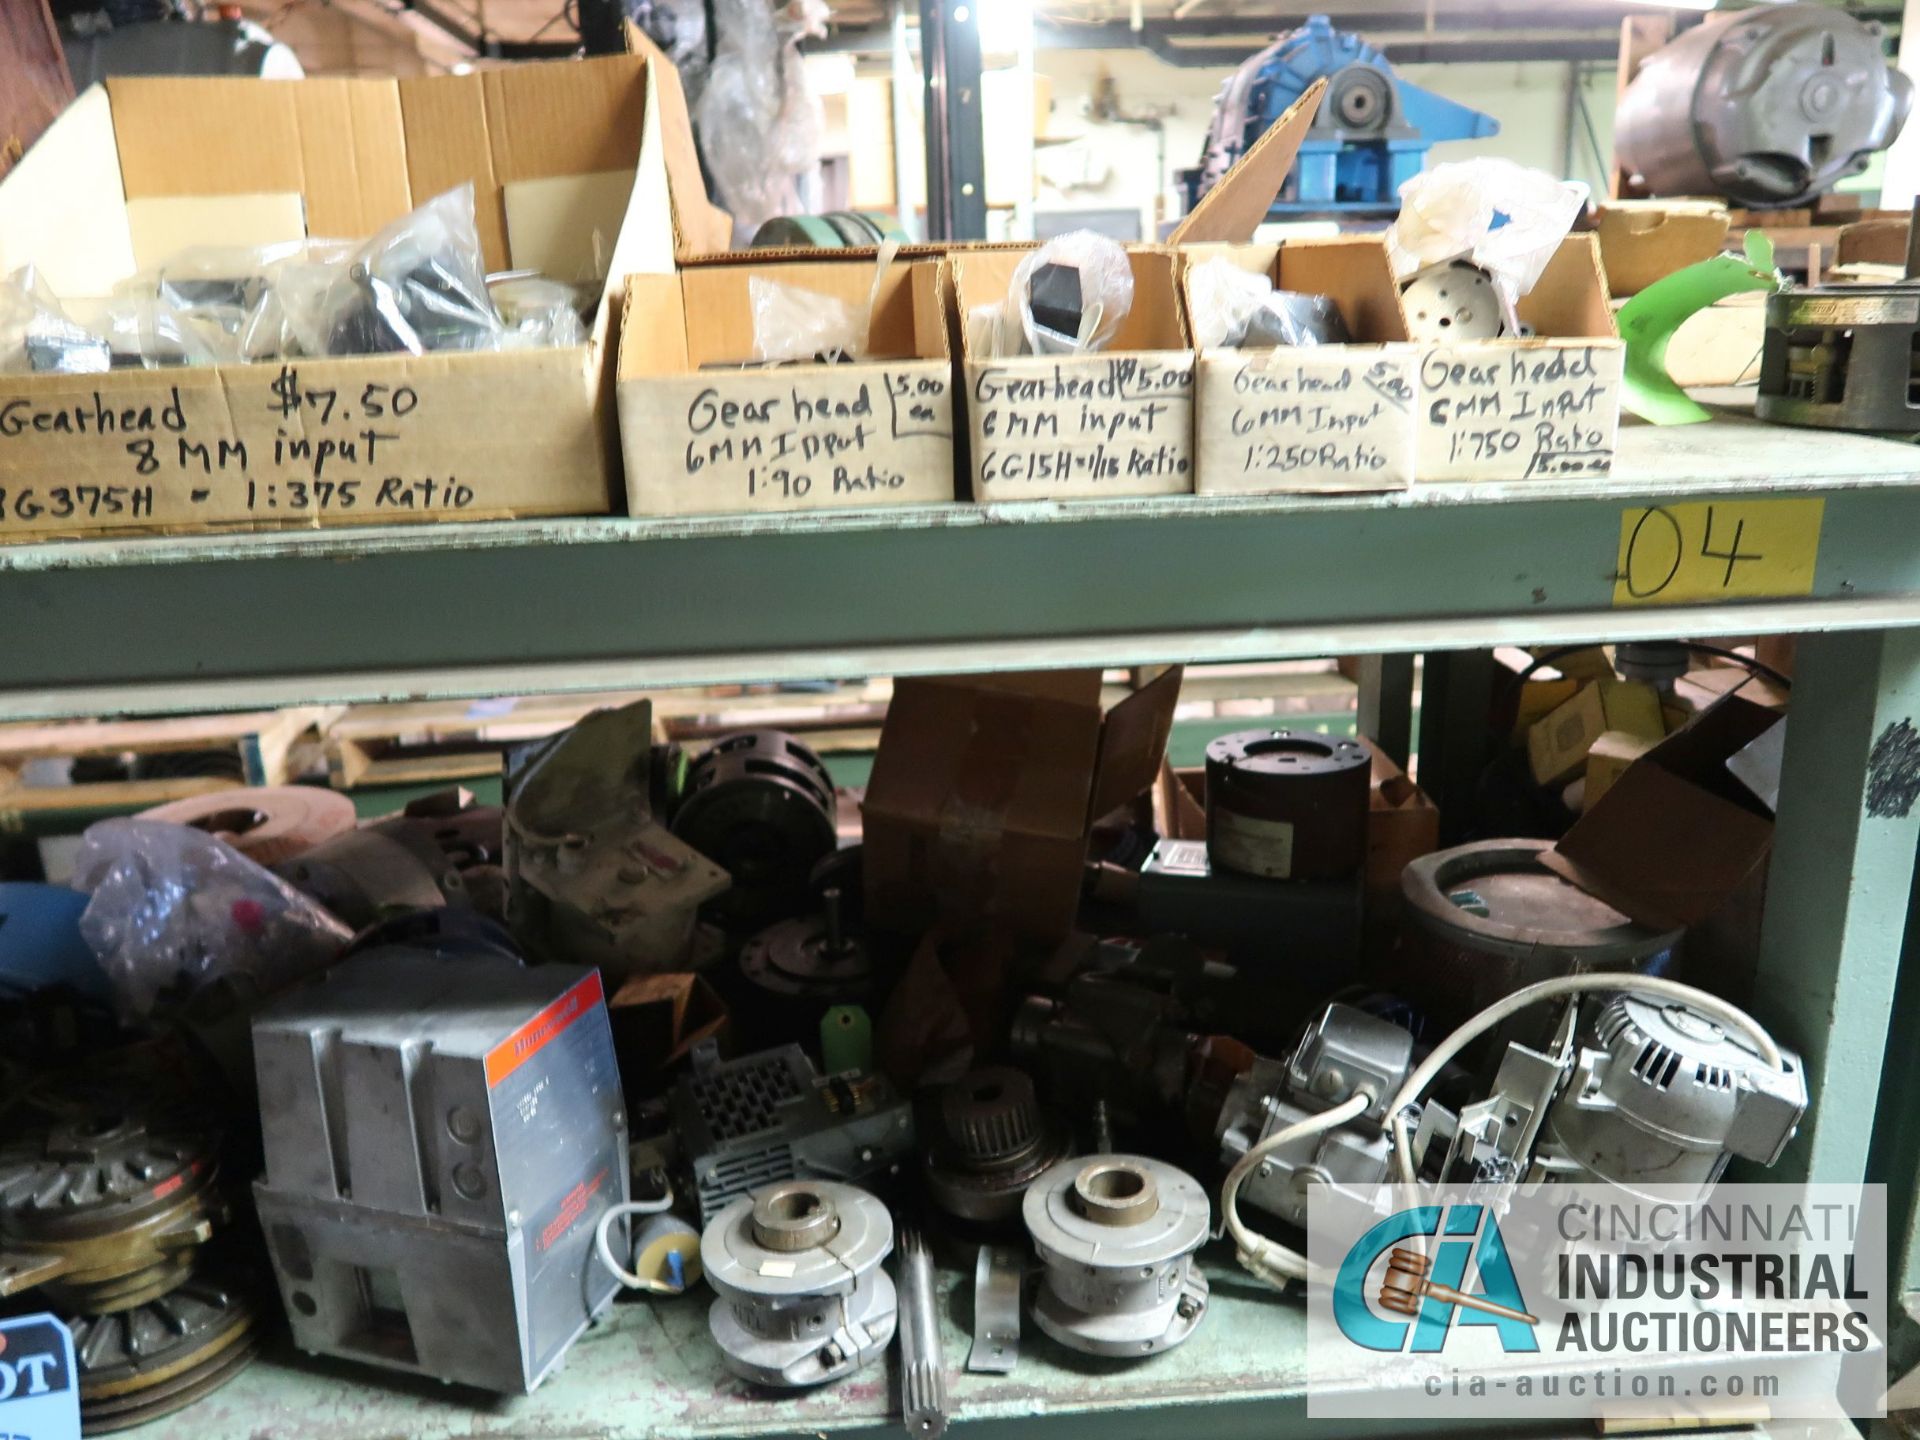 (LOT) MACHINE PARTS, COMPRESSORS, REDUCERS, GEARS, MOTORS, AND OTHER (4) SECTIONS RACK - Image 17 of 28